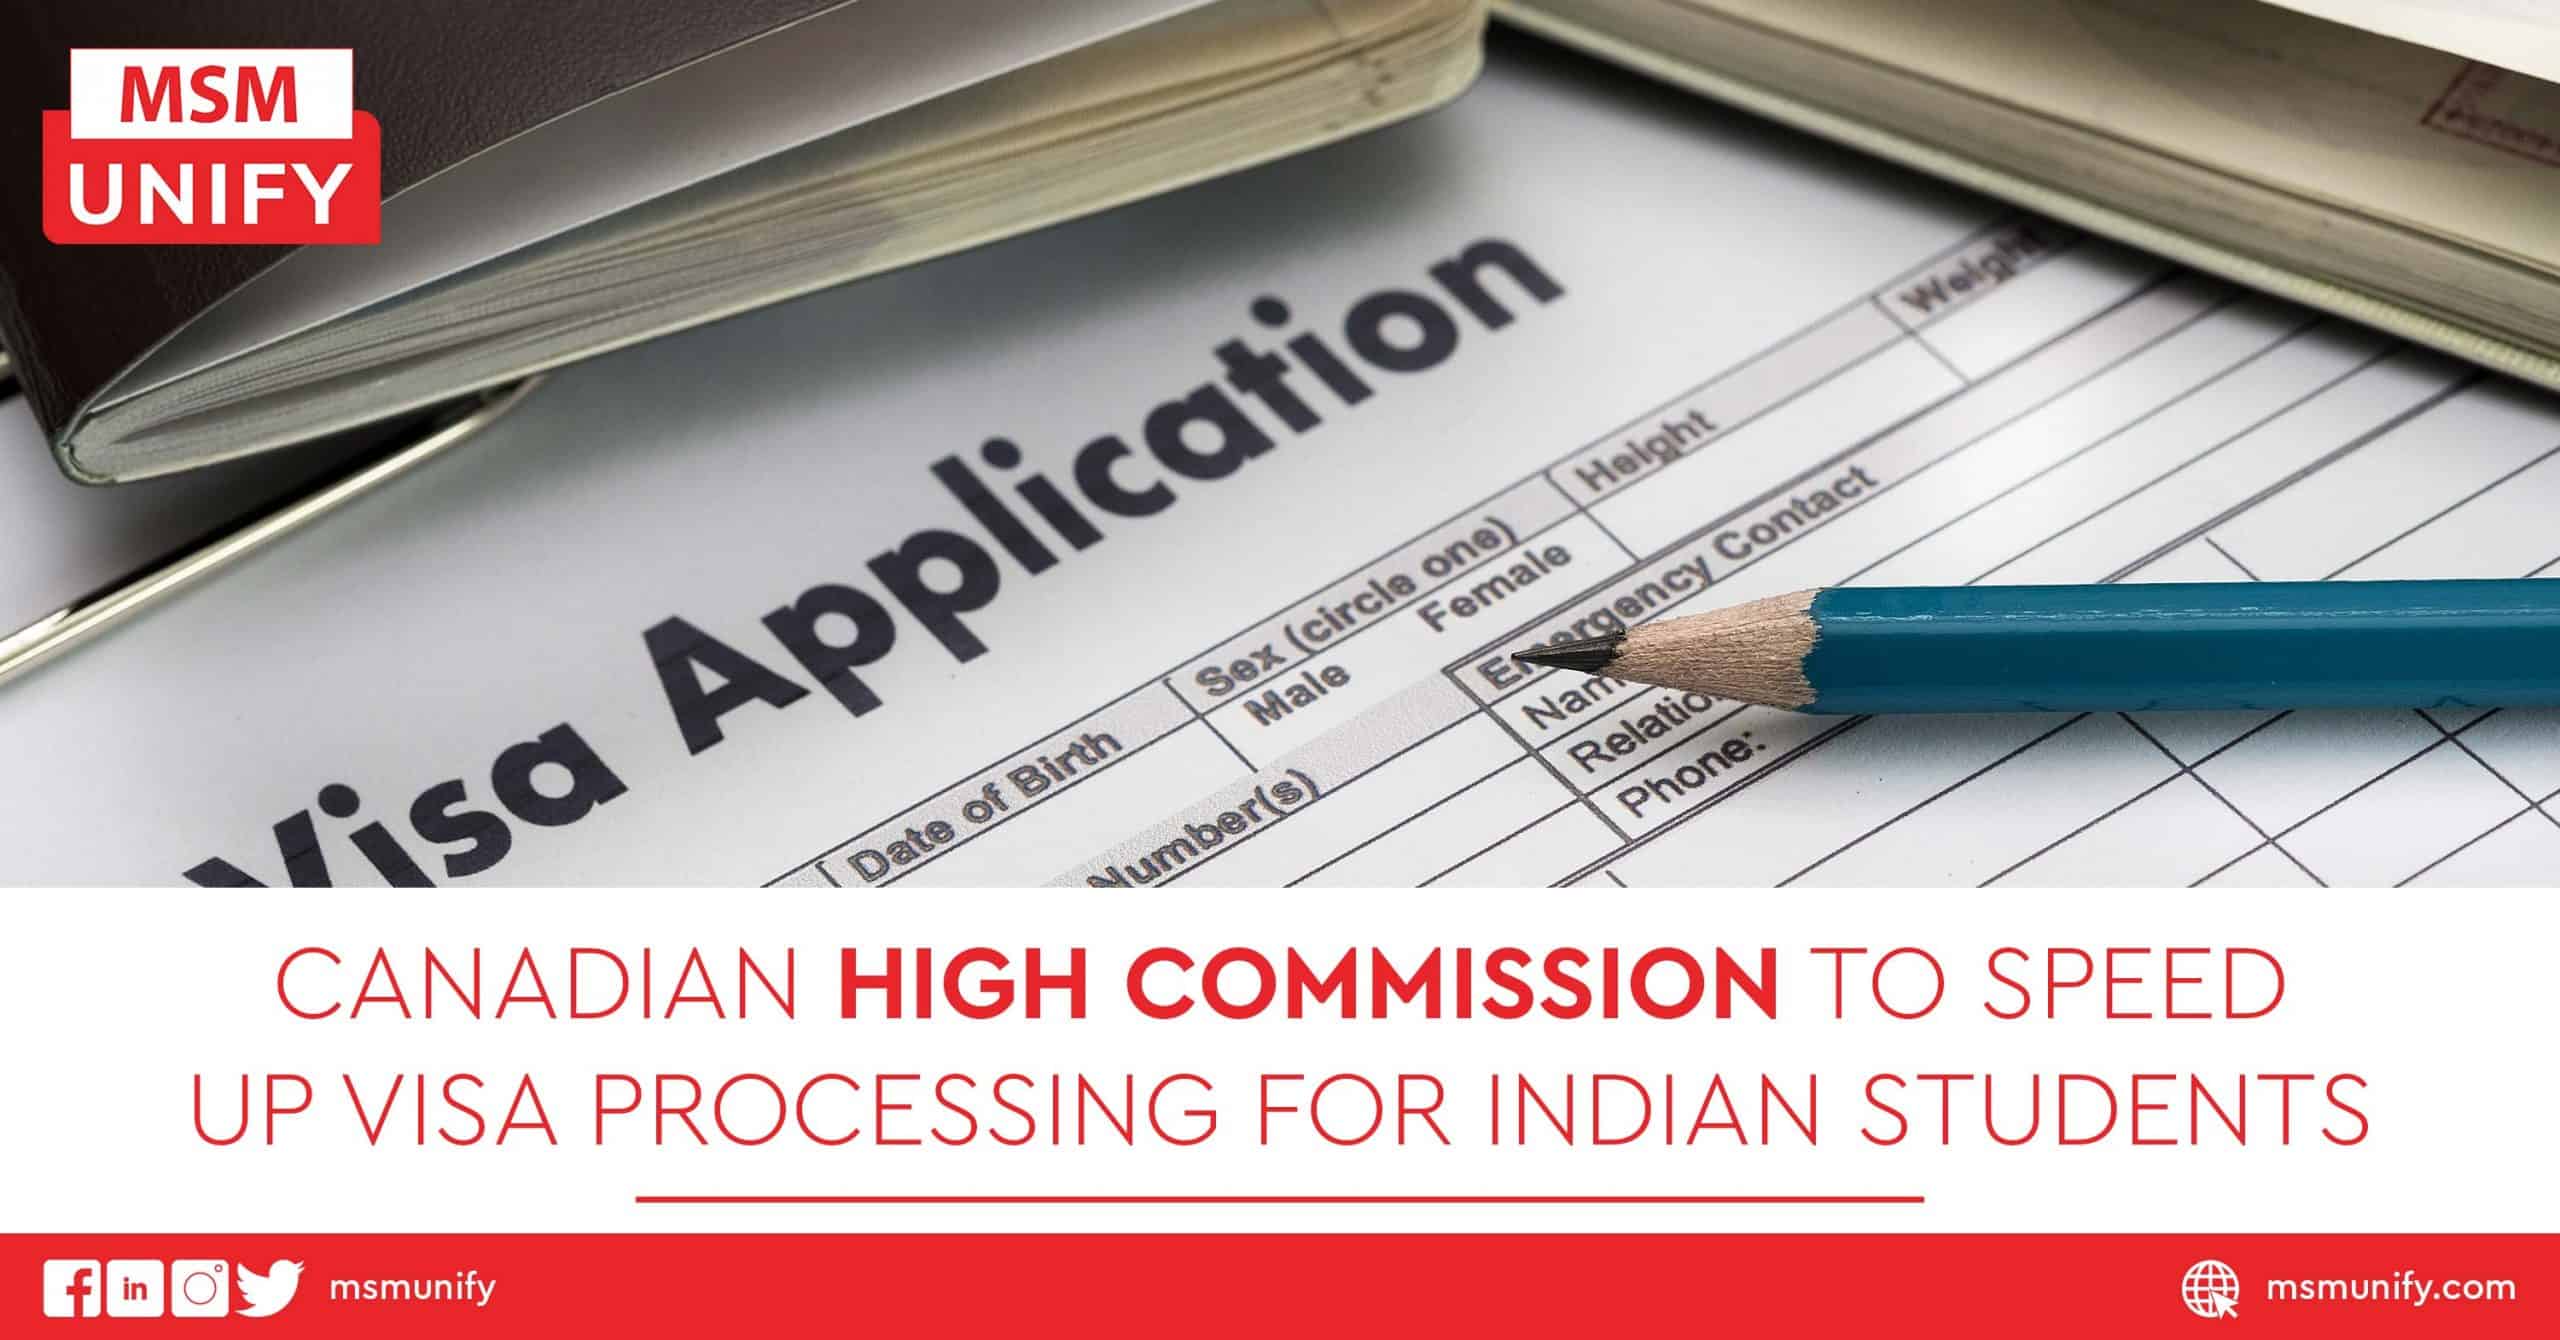 Canadian High Commission To Speed Up Visa Processing for Indian Students scaled 1